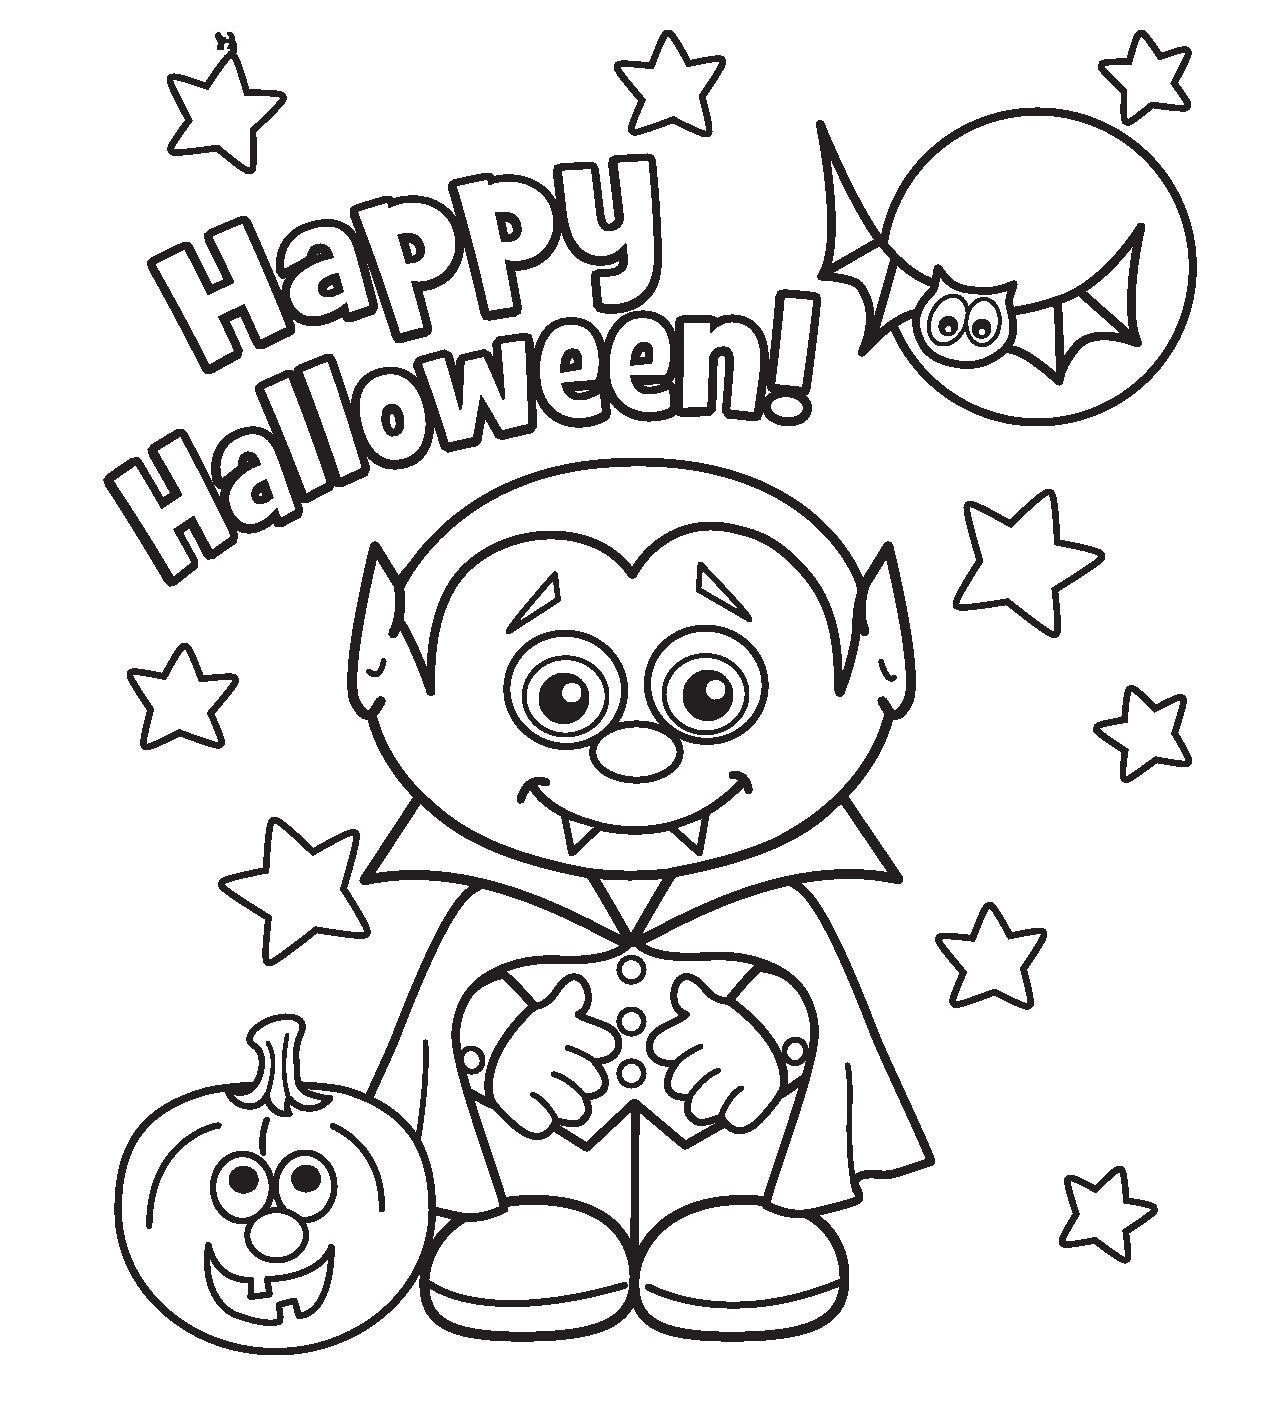  Happy Halloween Dracula Coloring Pages for Kids